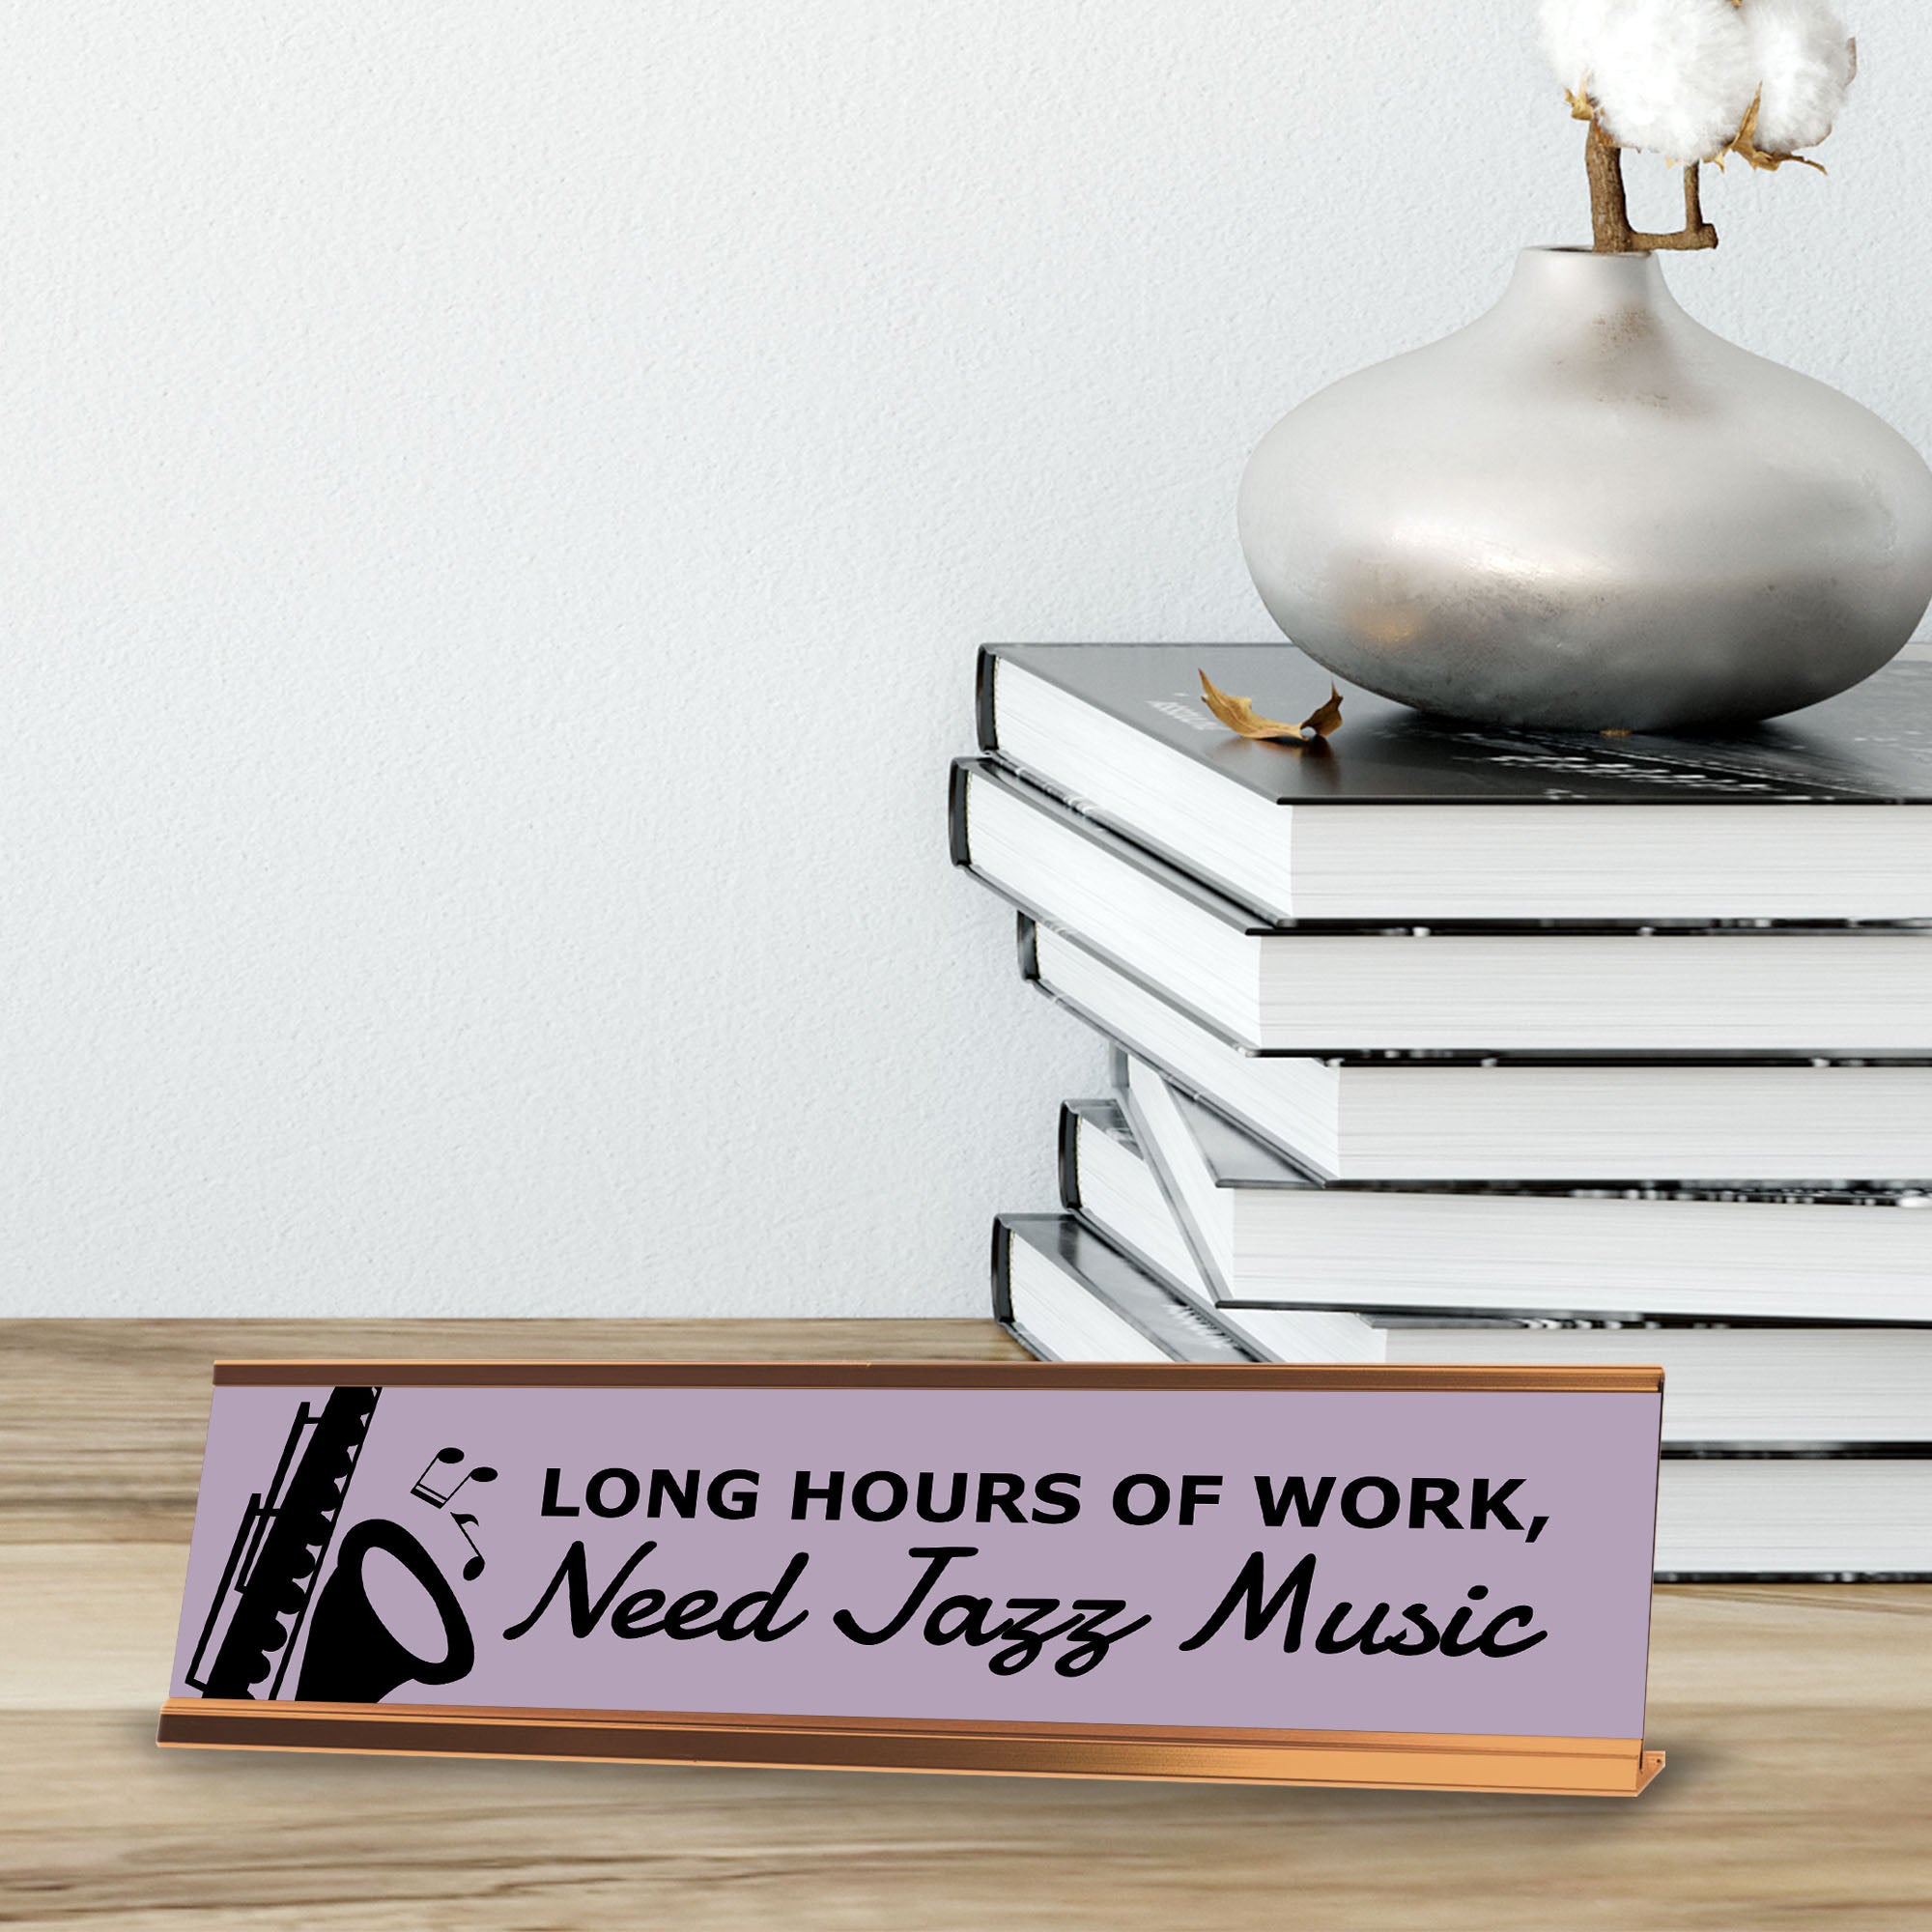 Long Hours Of Work, Need Jazz Music, Gold Frame, Desk Sign (2x8)